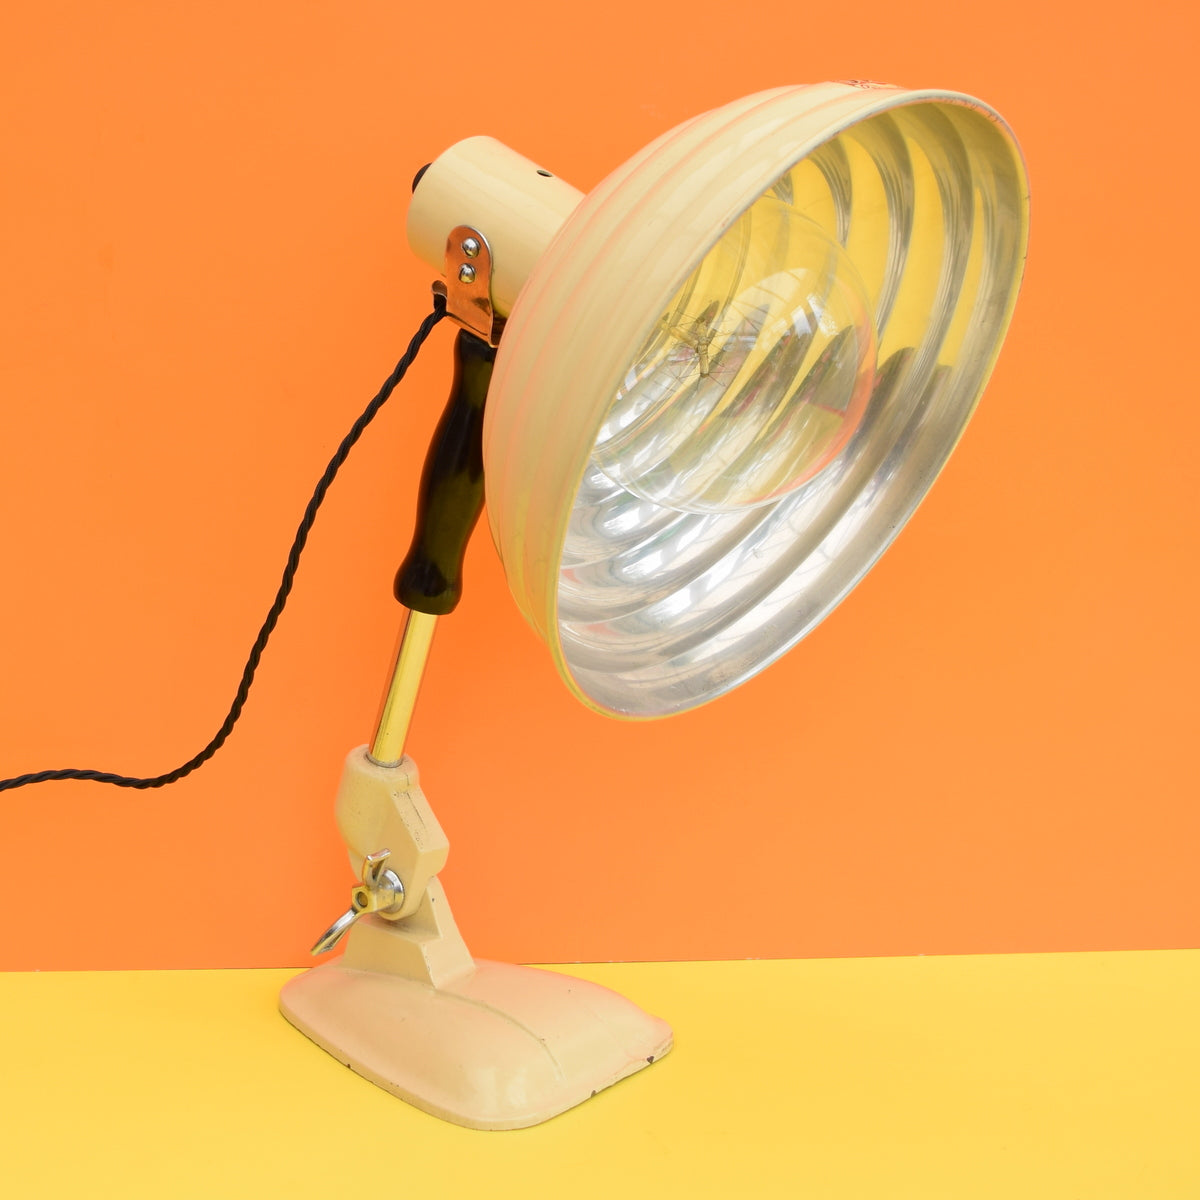 Vintage 1950s Pifco Metal Desk Lamp With Box - Originally a Heat Lamp